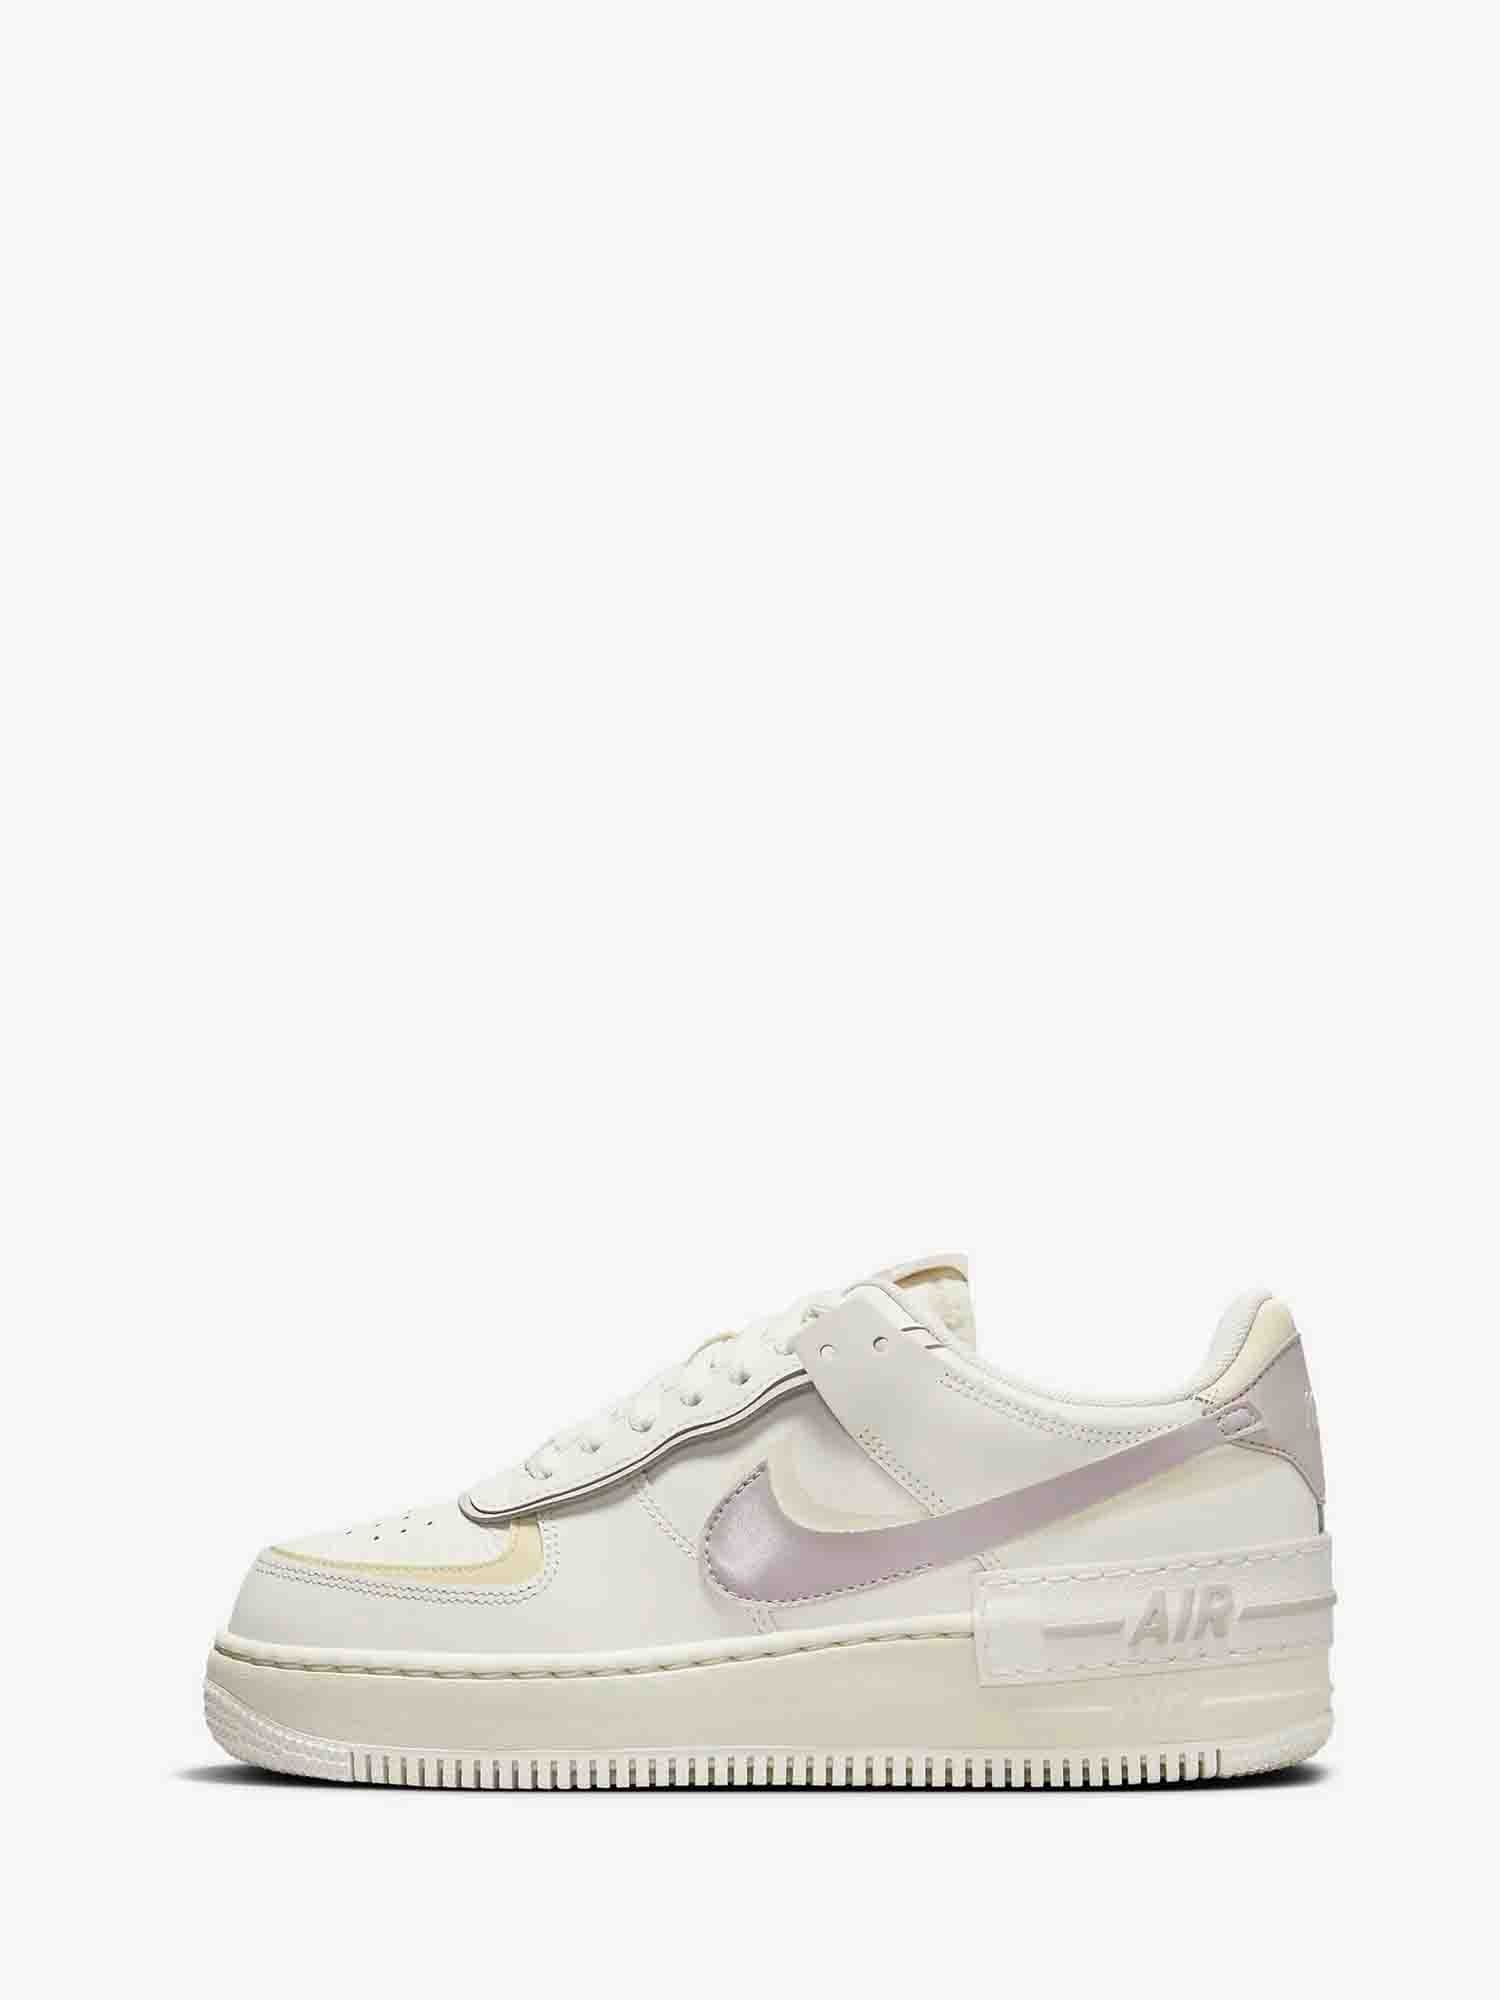 NIKE AIR FORCE 1 SHADOW SNEAKERS DONNA BIANCO-ROSA